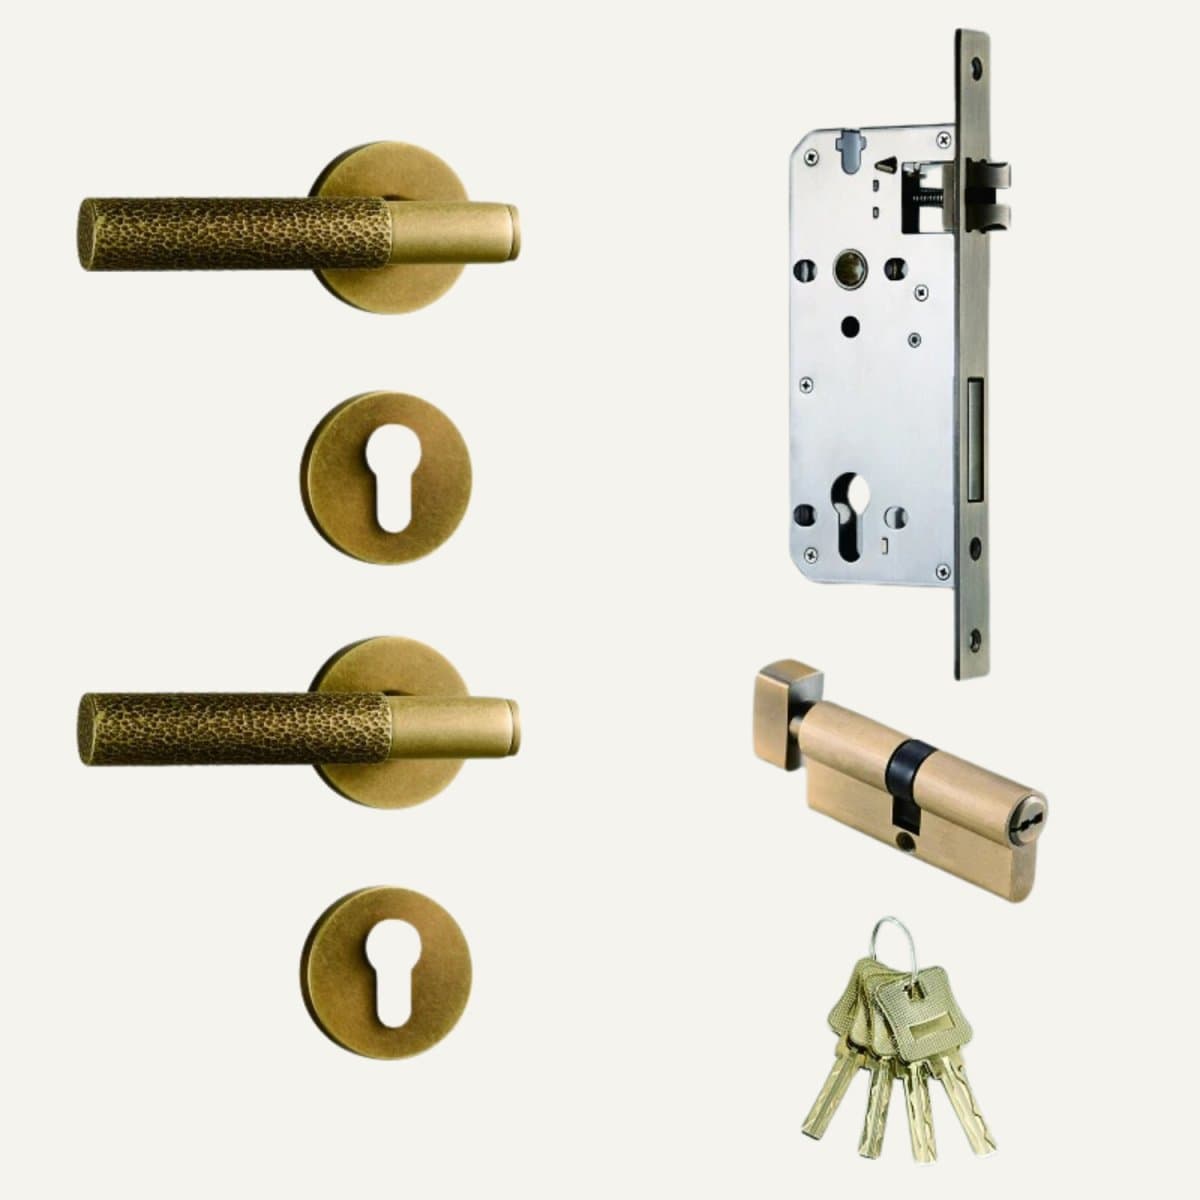 Residence Supply 2.2" x 5.3" / 5.5 x 13.5cm / With Mortice Lock & Keys / Antique Brass Asper Handle and Lock